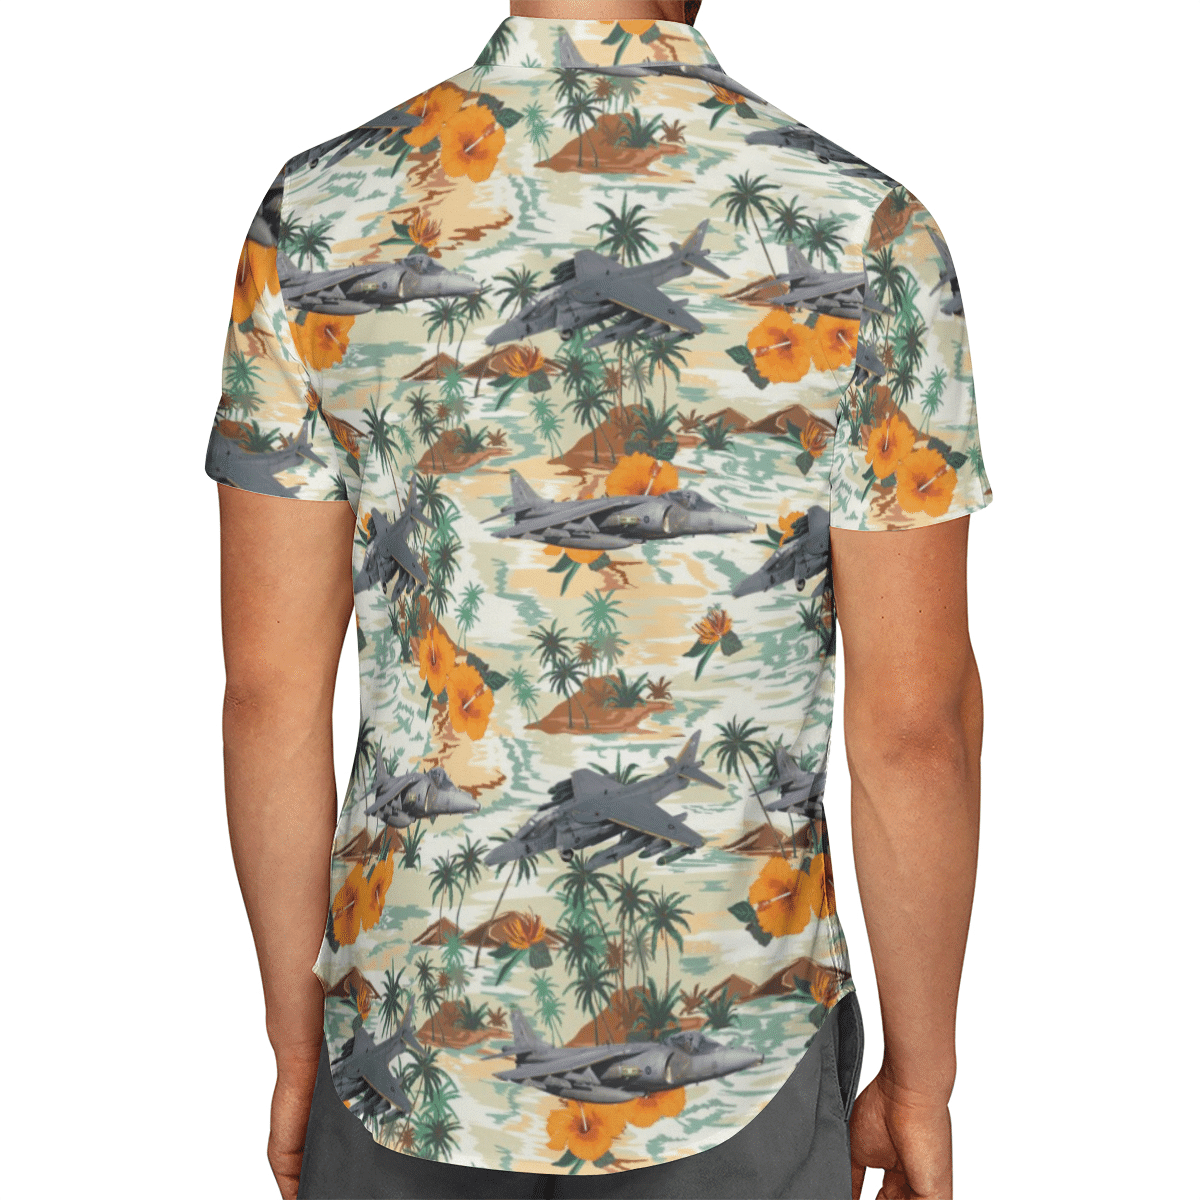 Going to the beach with a quality shirt 179